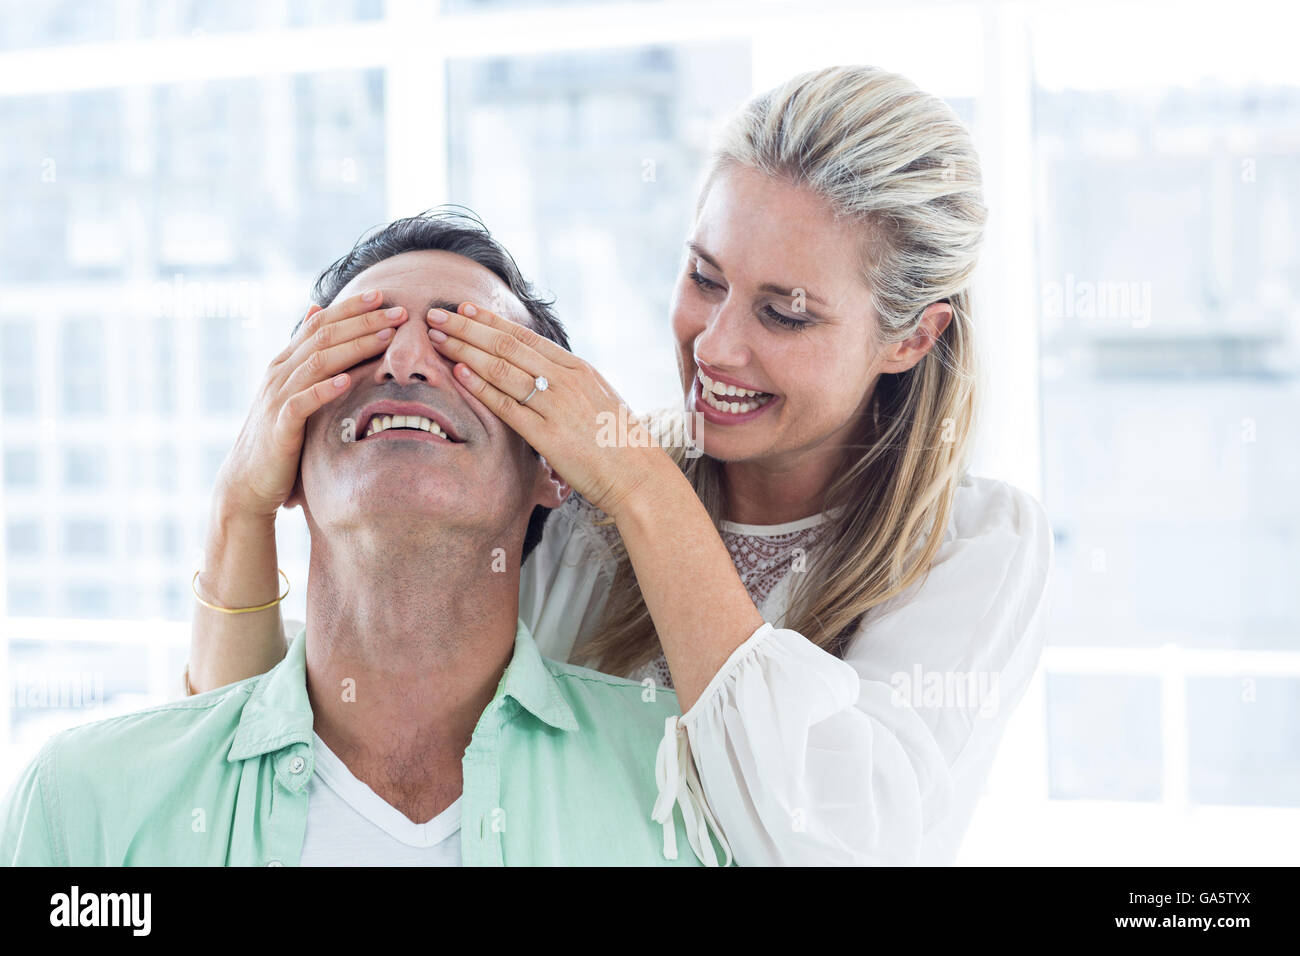 Mid adult woman covering eyes of man Stock Photo